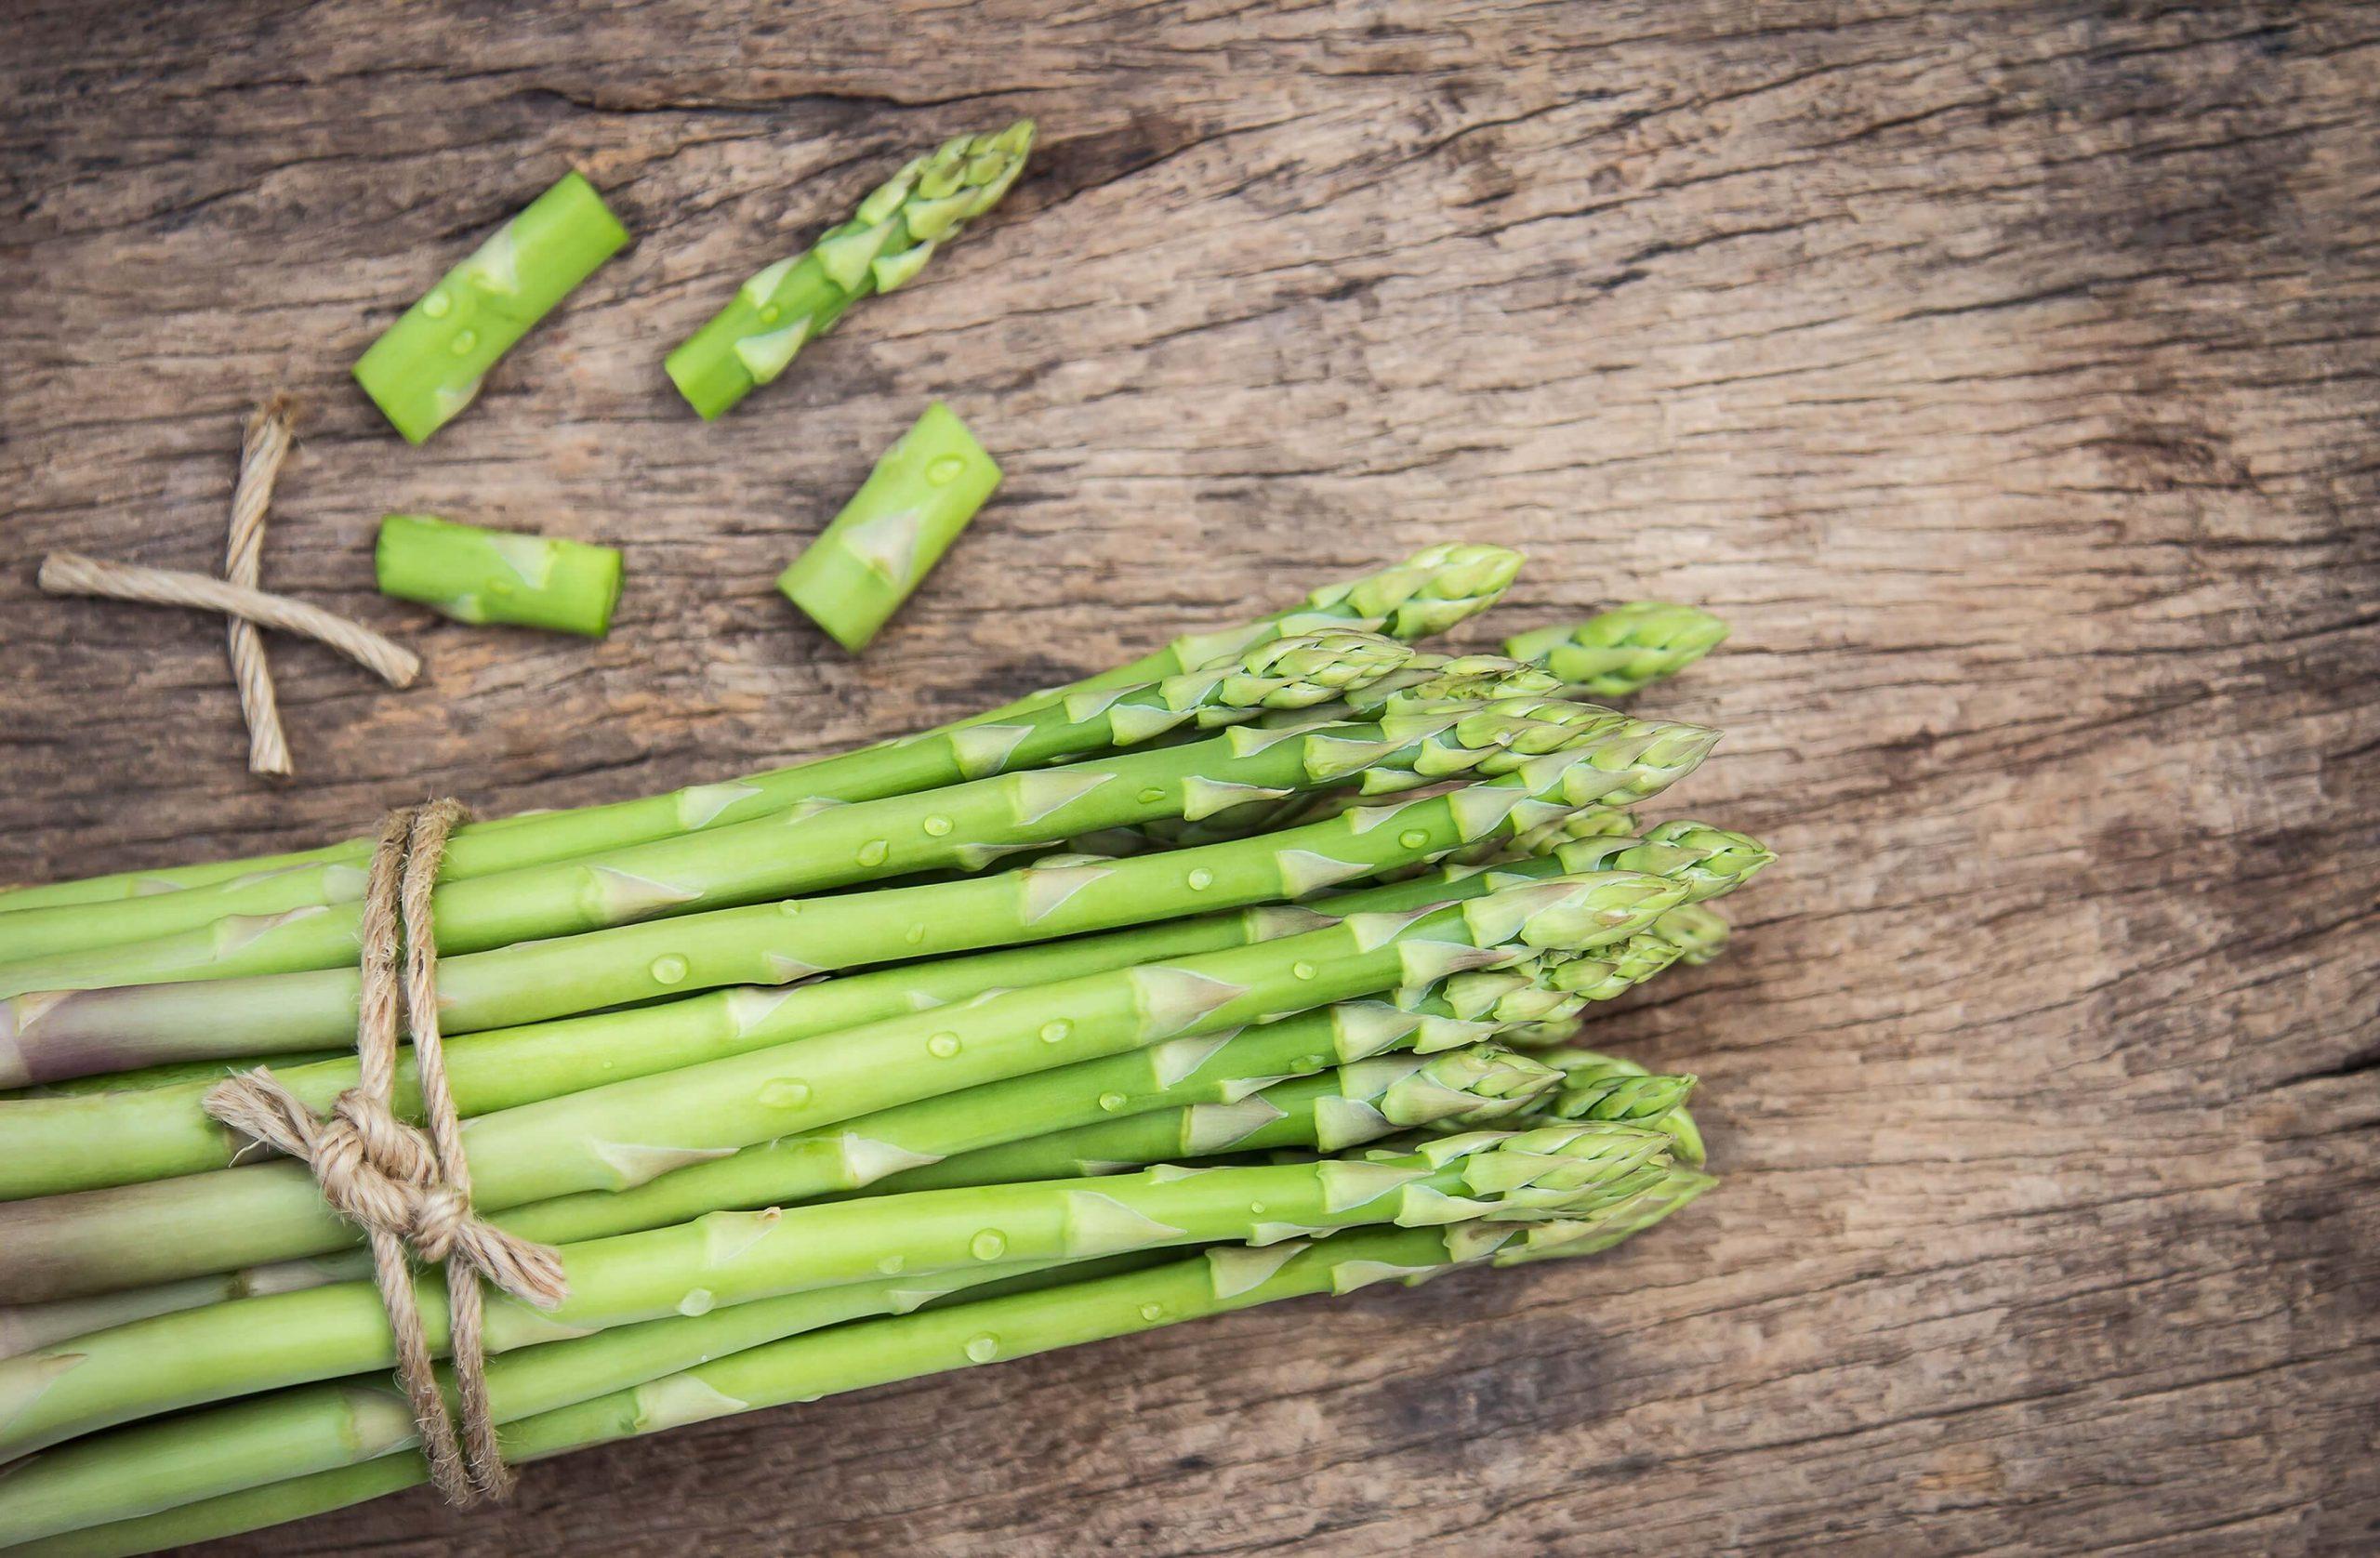 Can asparagus prevent hangovers?